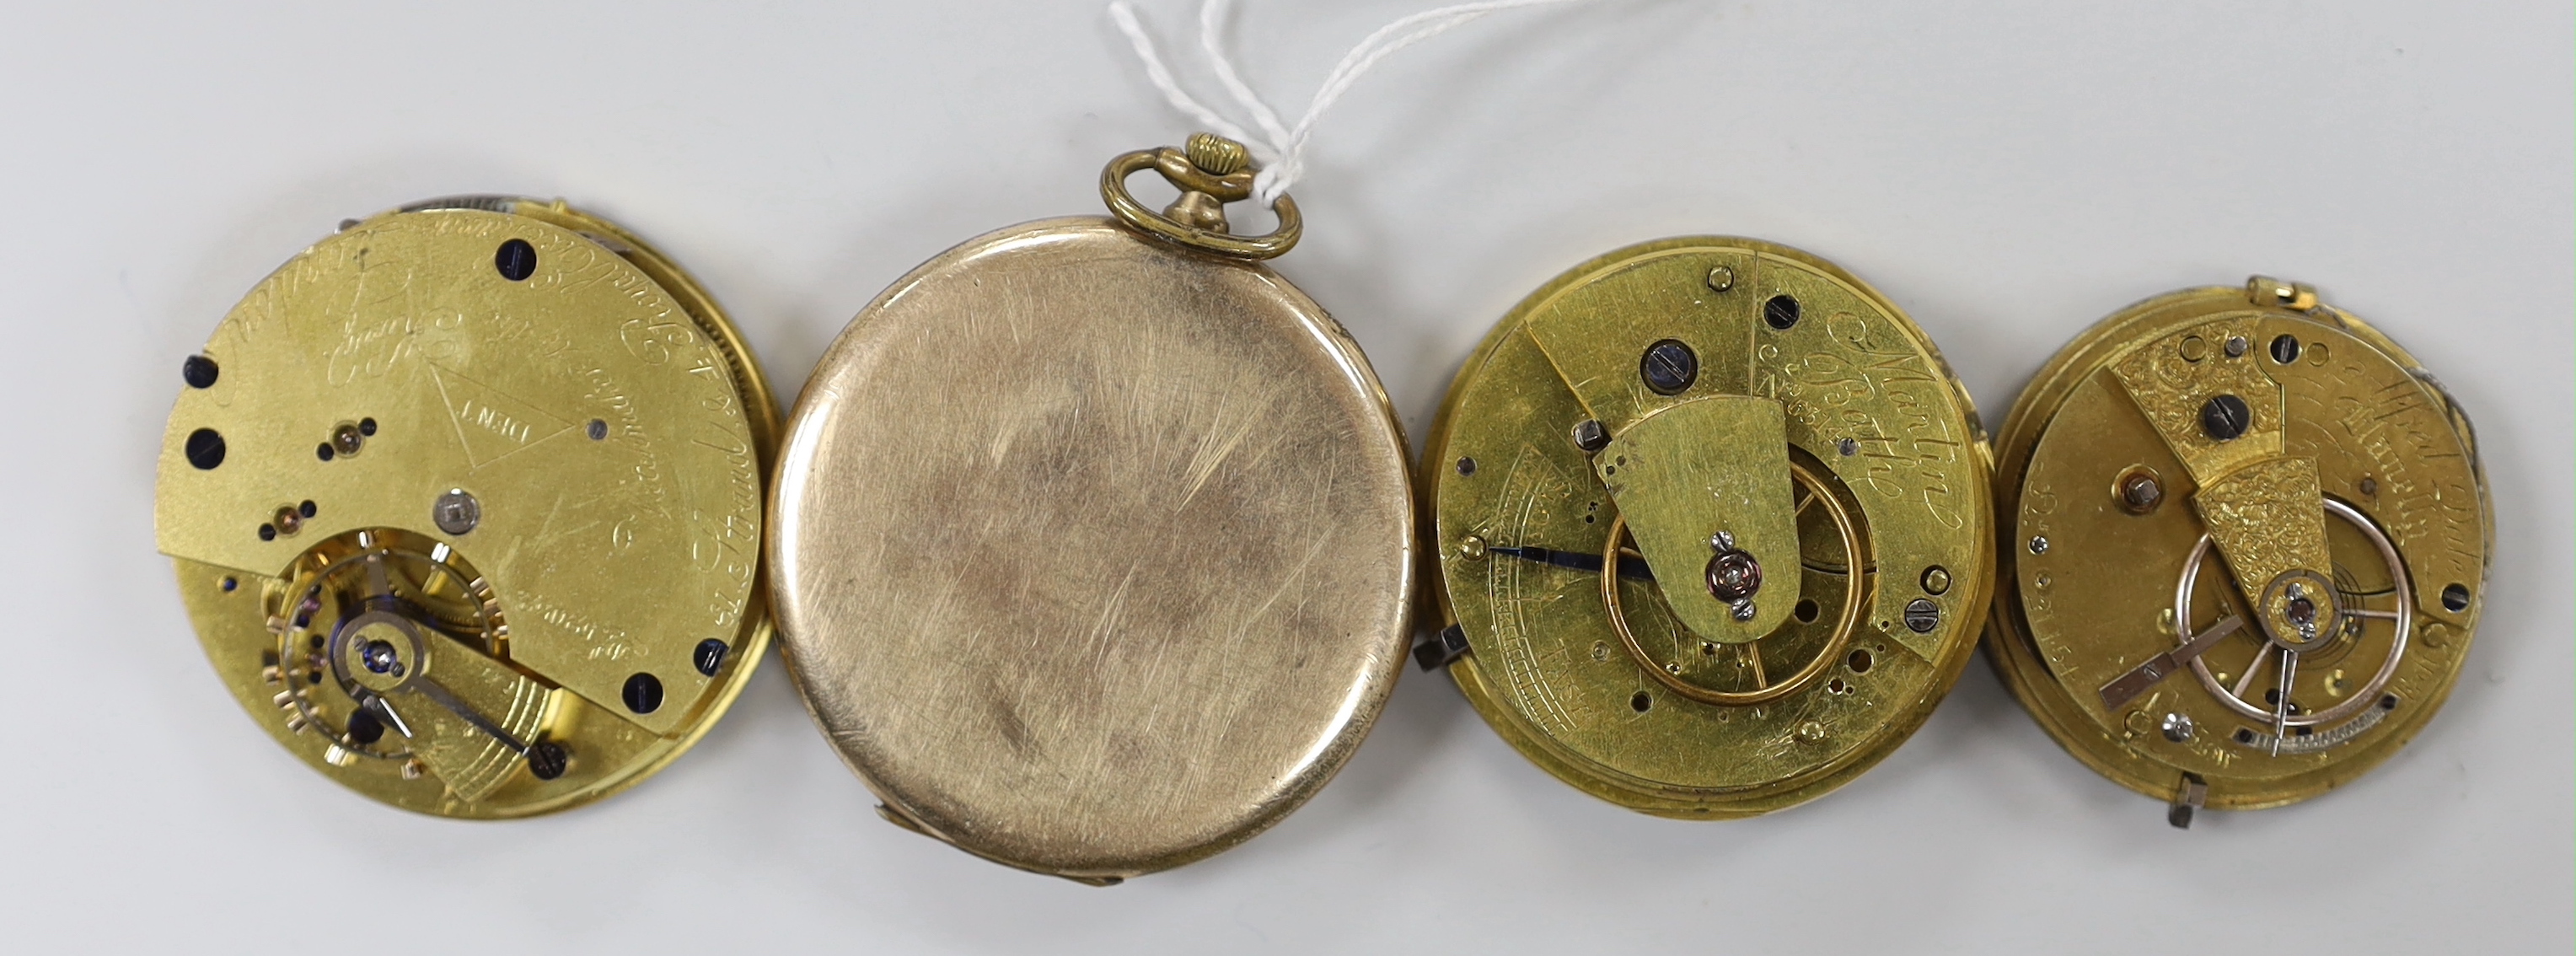 A gold plated Tempo open faced pocket watch and three pocket watch movements.